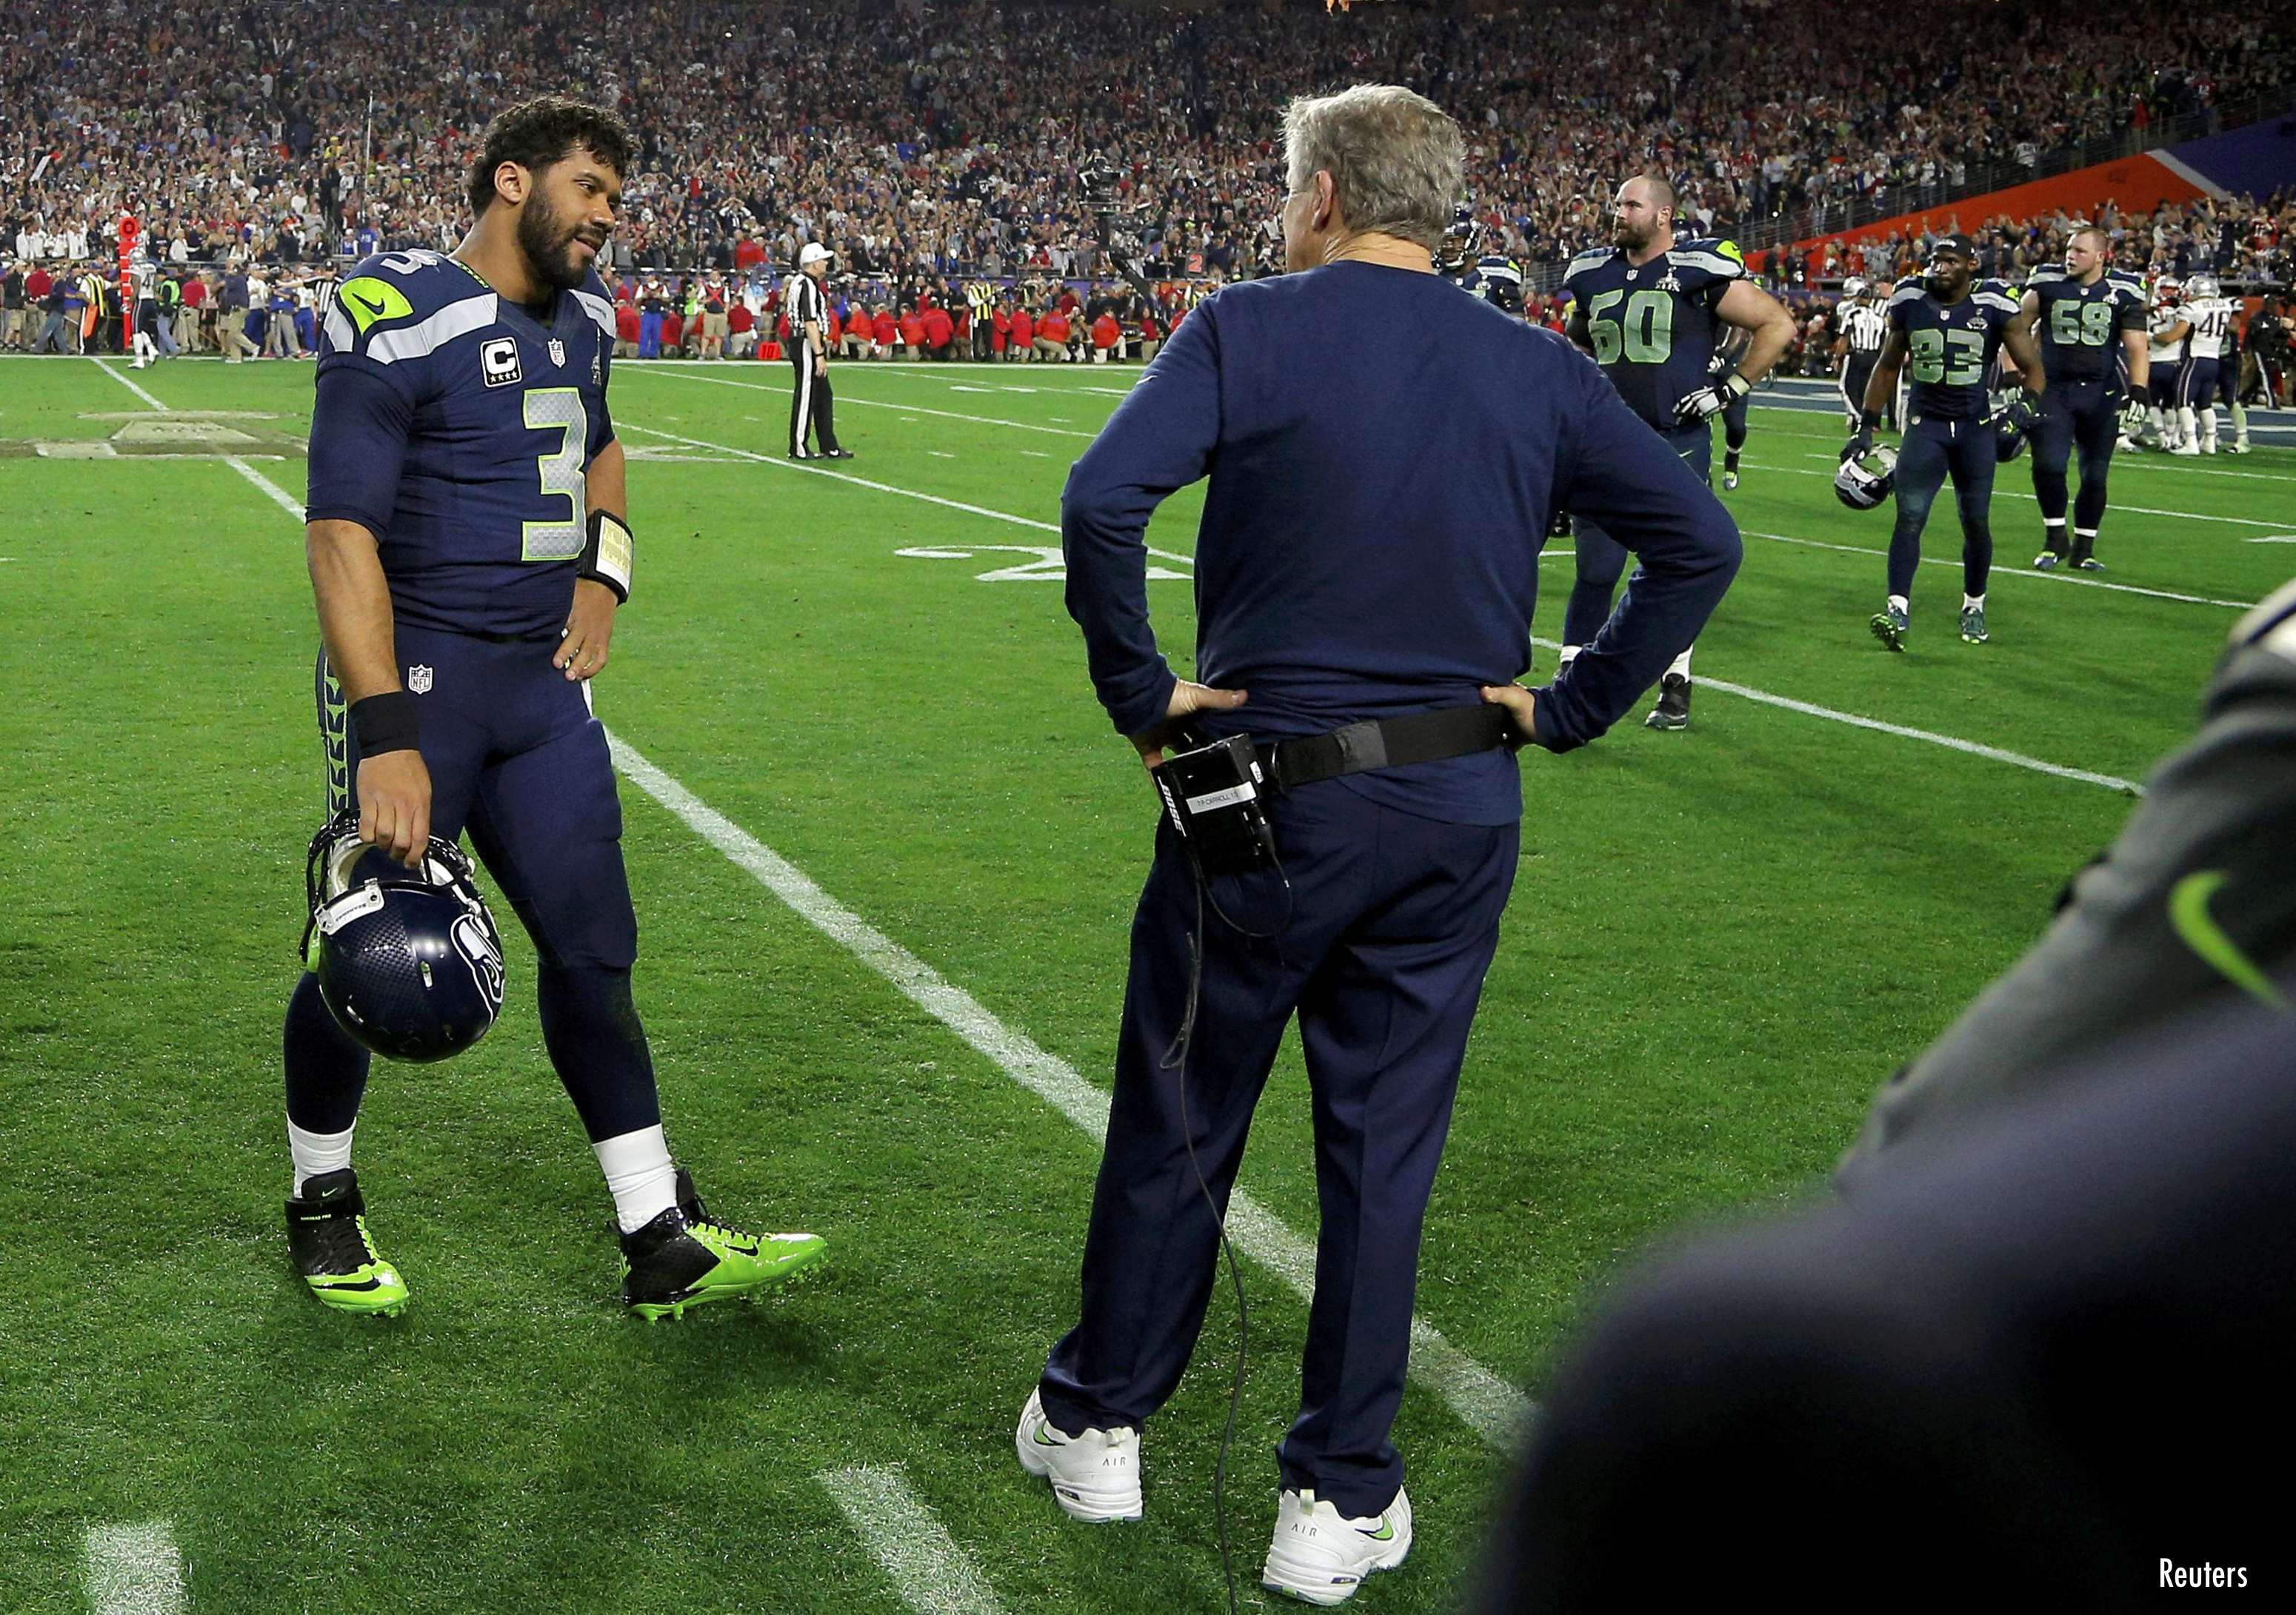 What on earth was Seattle thinking with worst play call in NFL history?